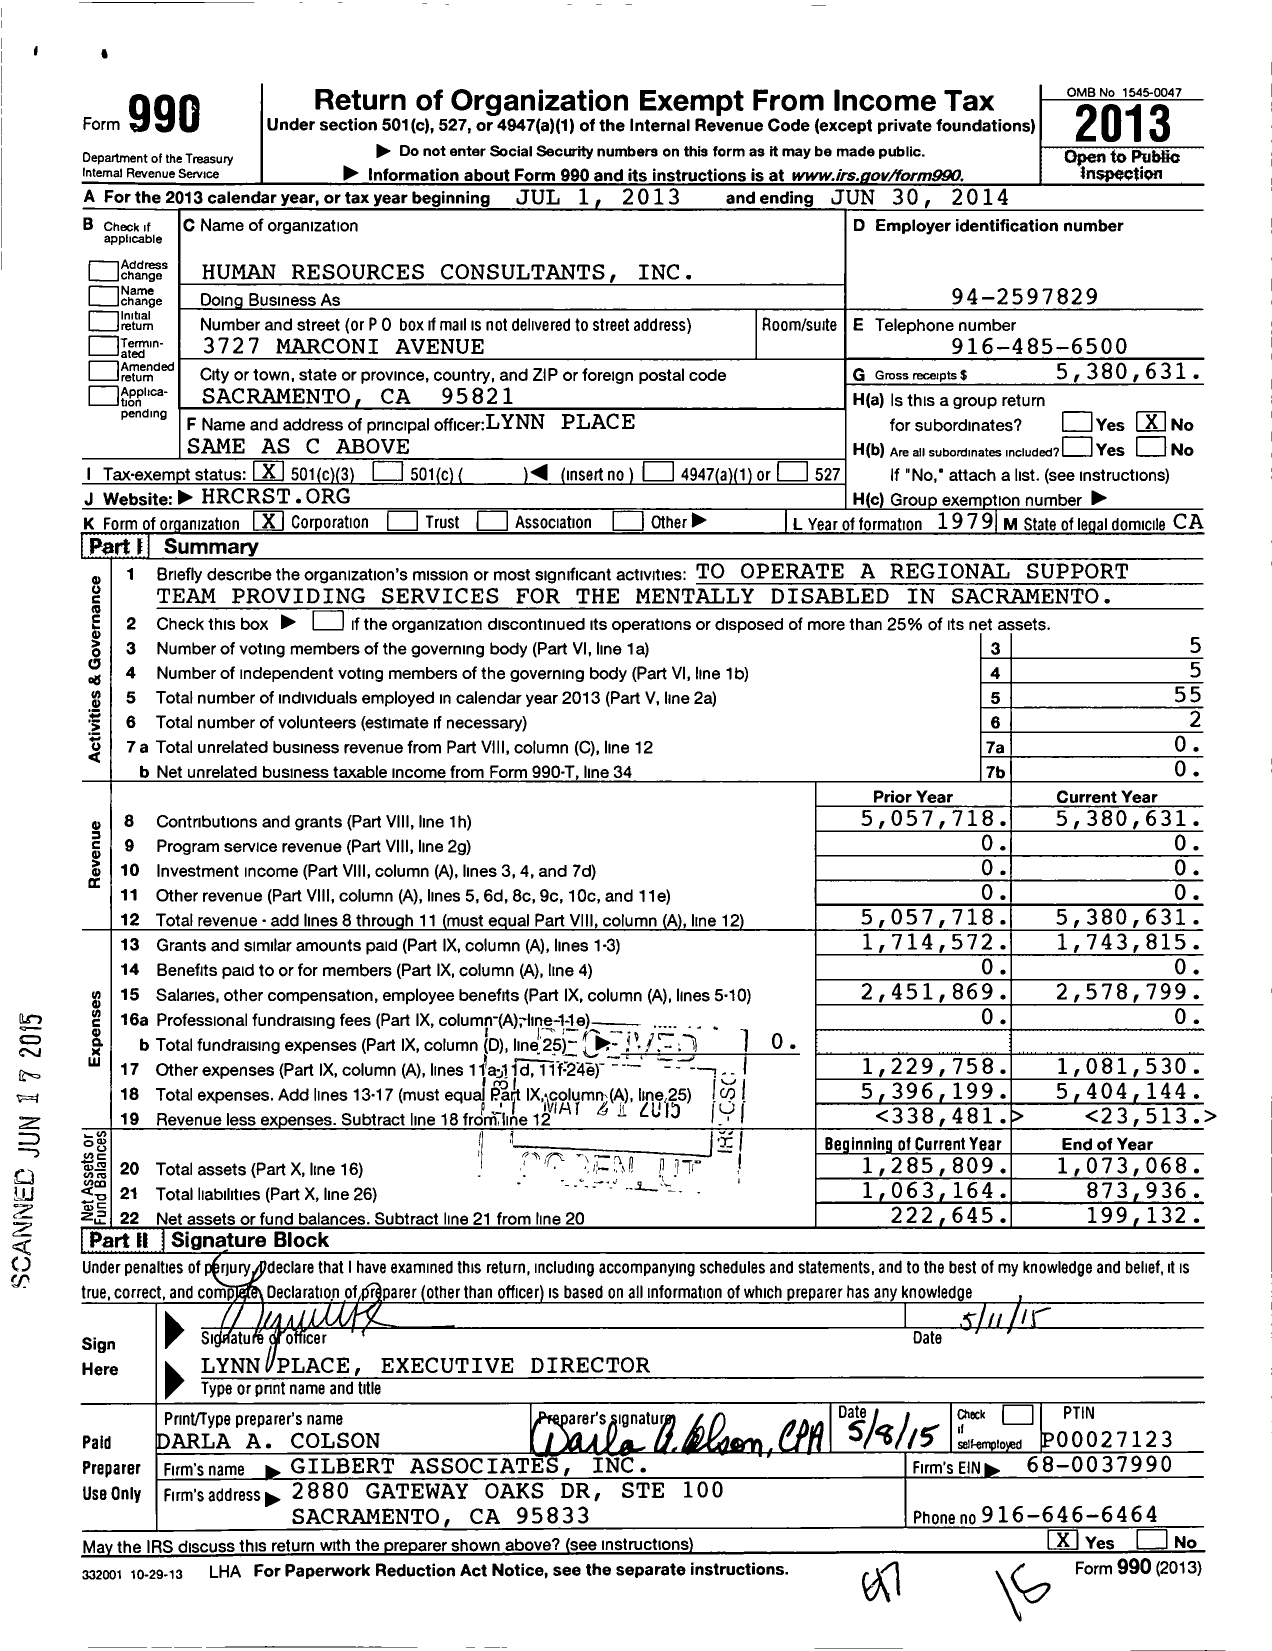 Image of first page of 2013 Form 990 for Human Resources Consultants